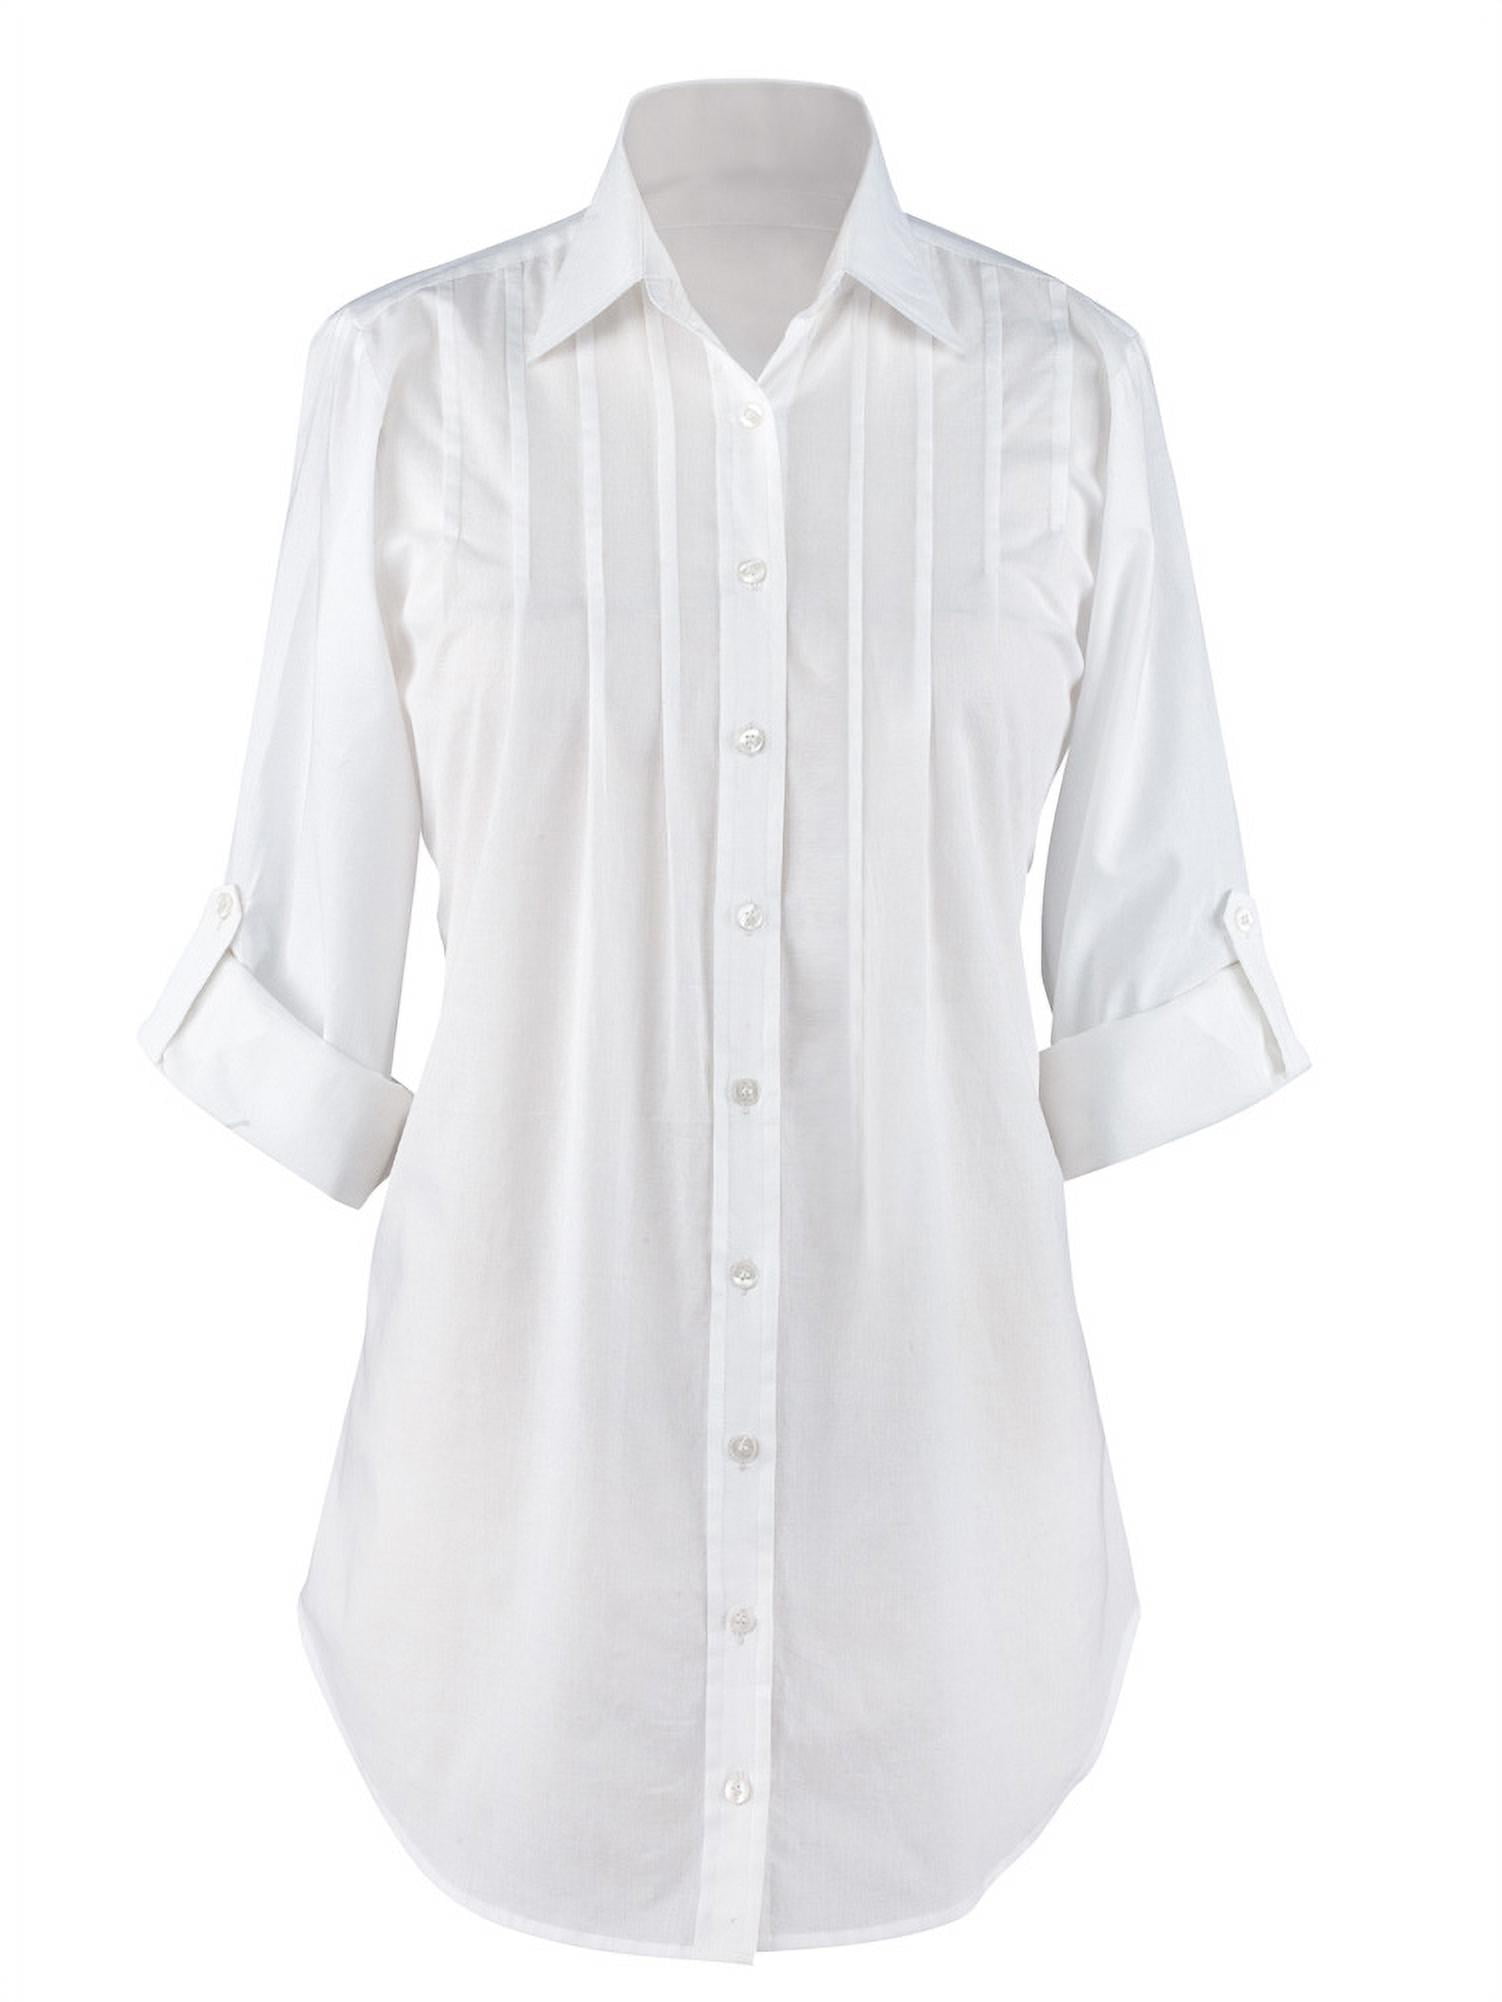 Women's Button Down, Collared, Roll Sleeve Tunic Top, Large 